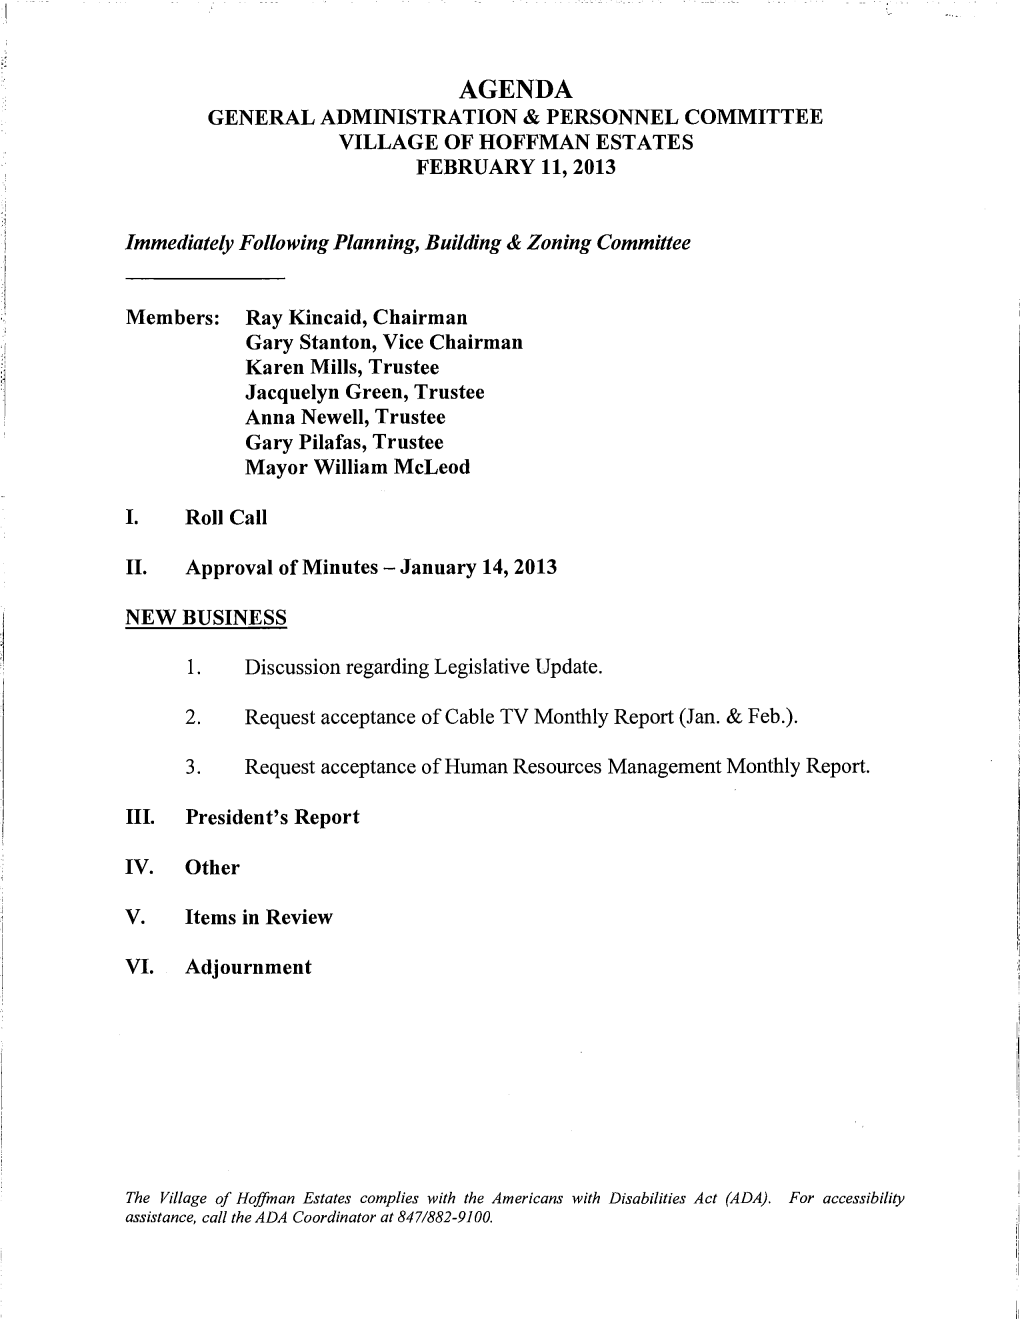 Agenda General Administration & Personnel Committee Village of Hoffman Estates February 11, 2013